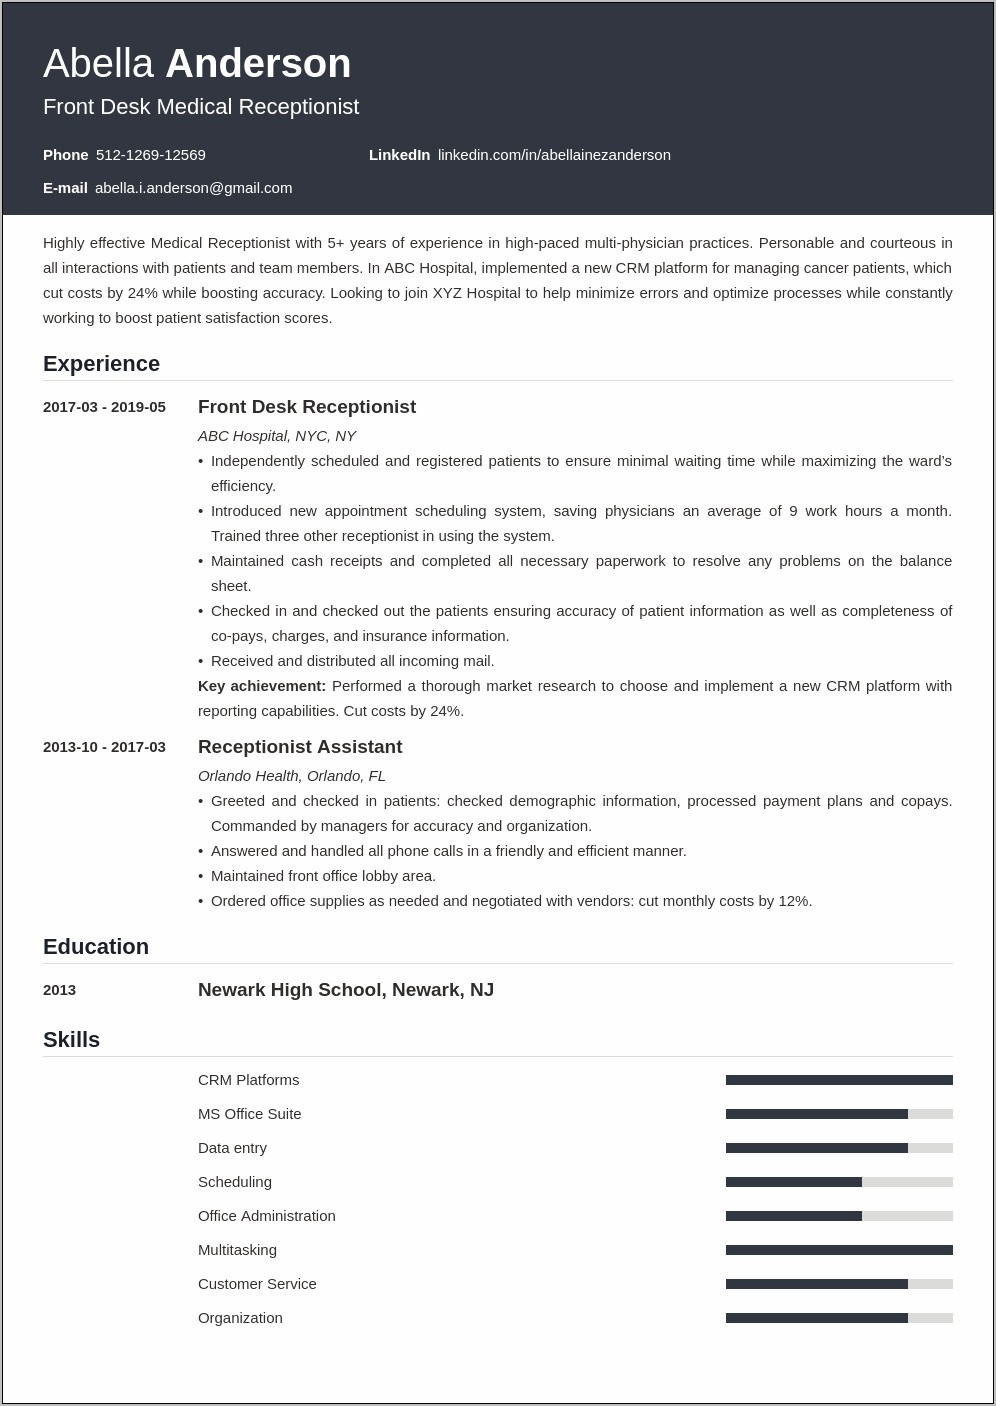 Resume For Medical Receptionist Objective